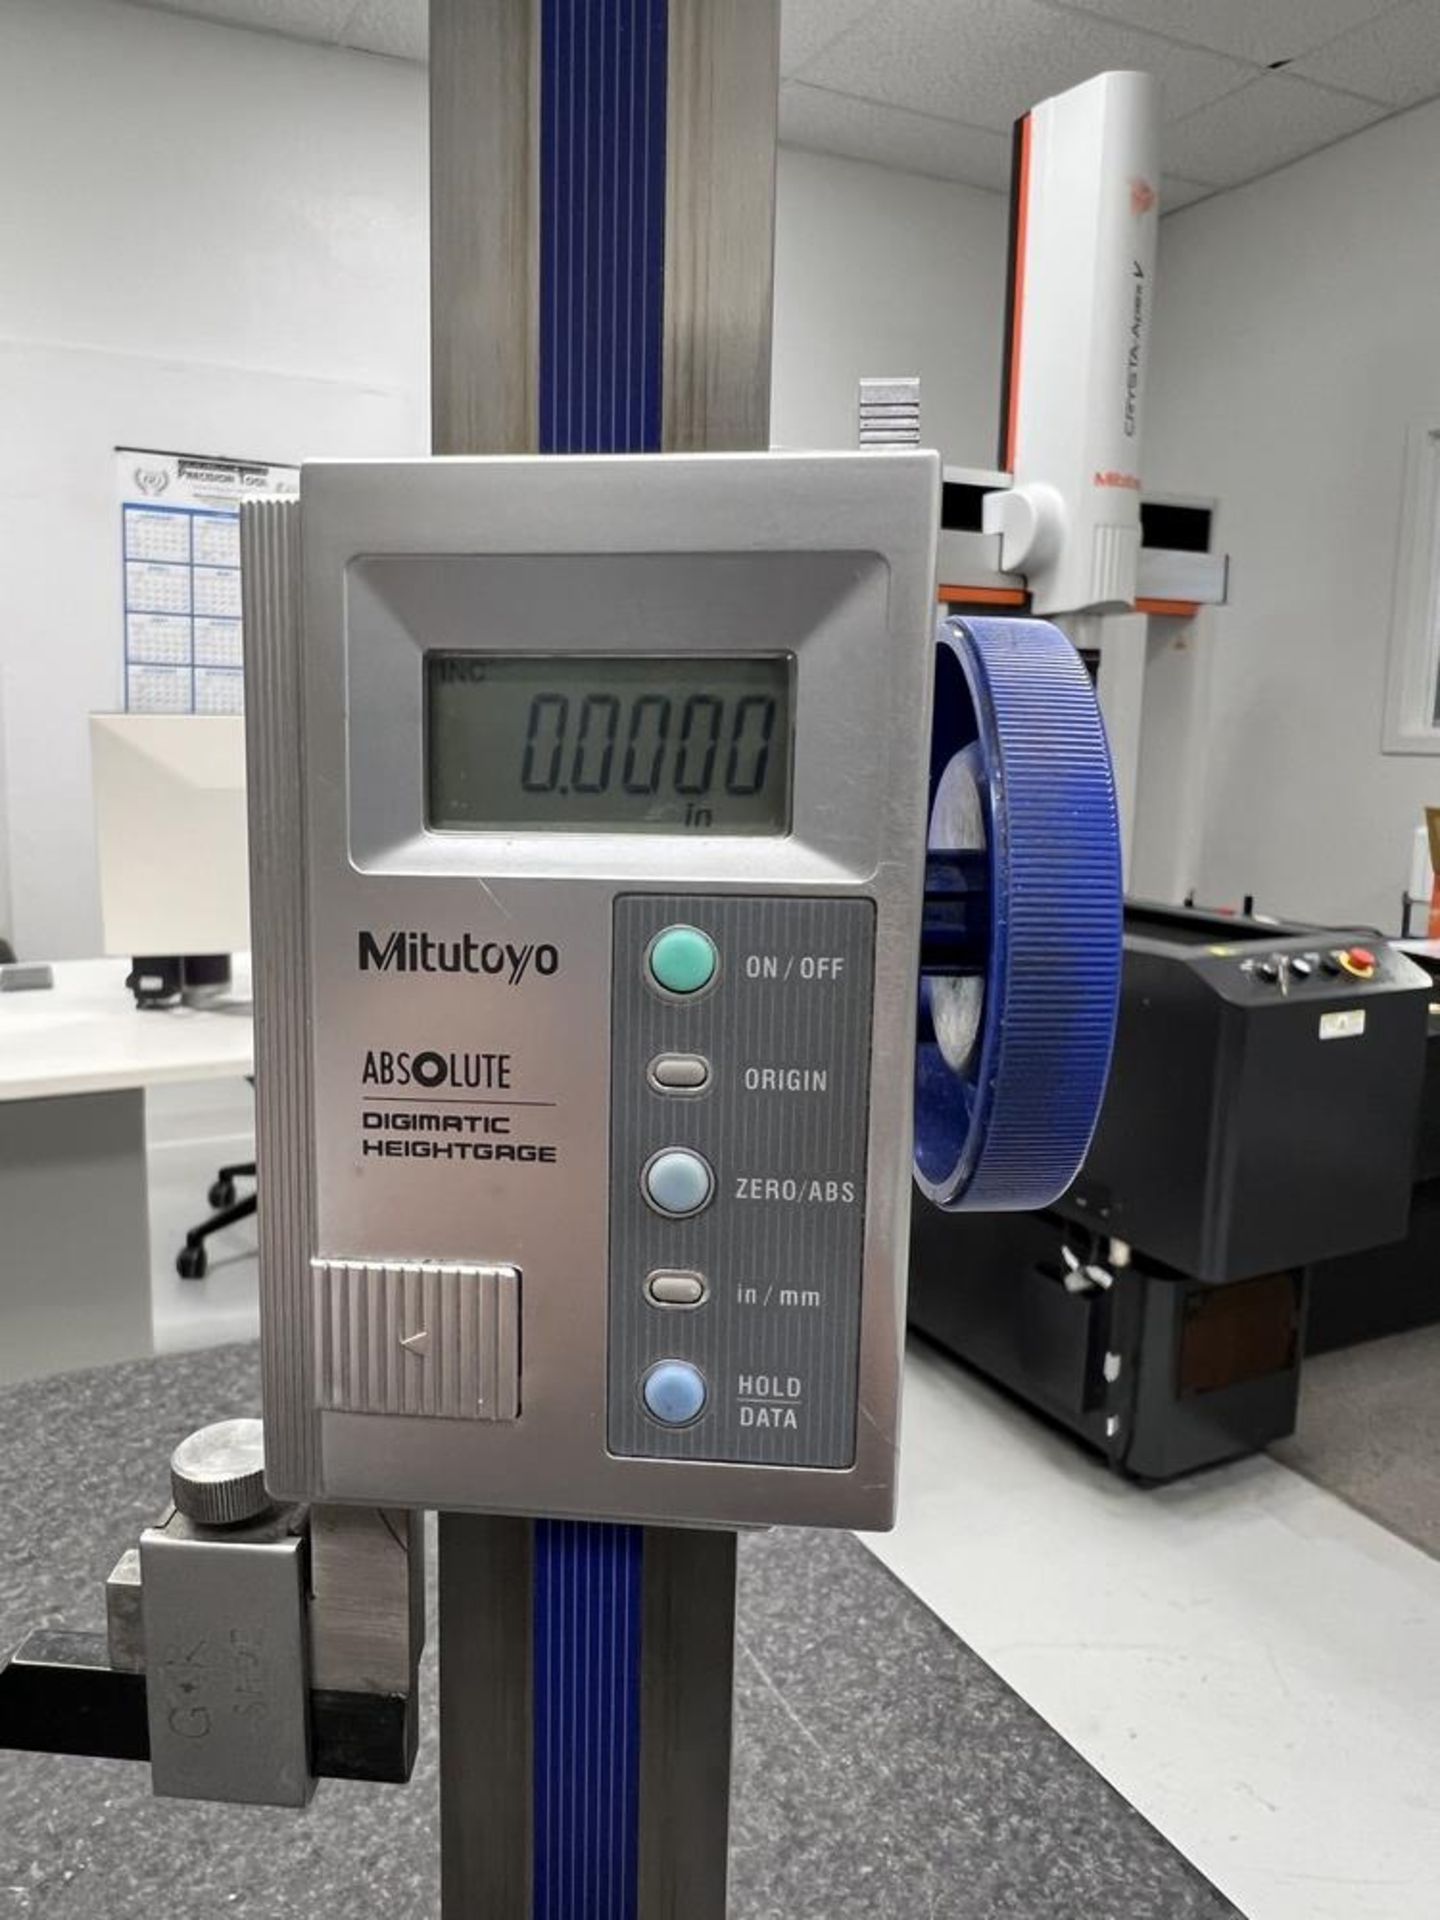 Mitutoyo Absolute Digimatic Height Gage 0-18", Digital Does Not Include Dial Caliper - Image 2 of 5